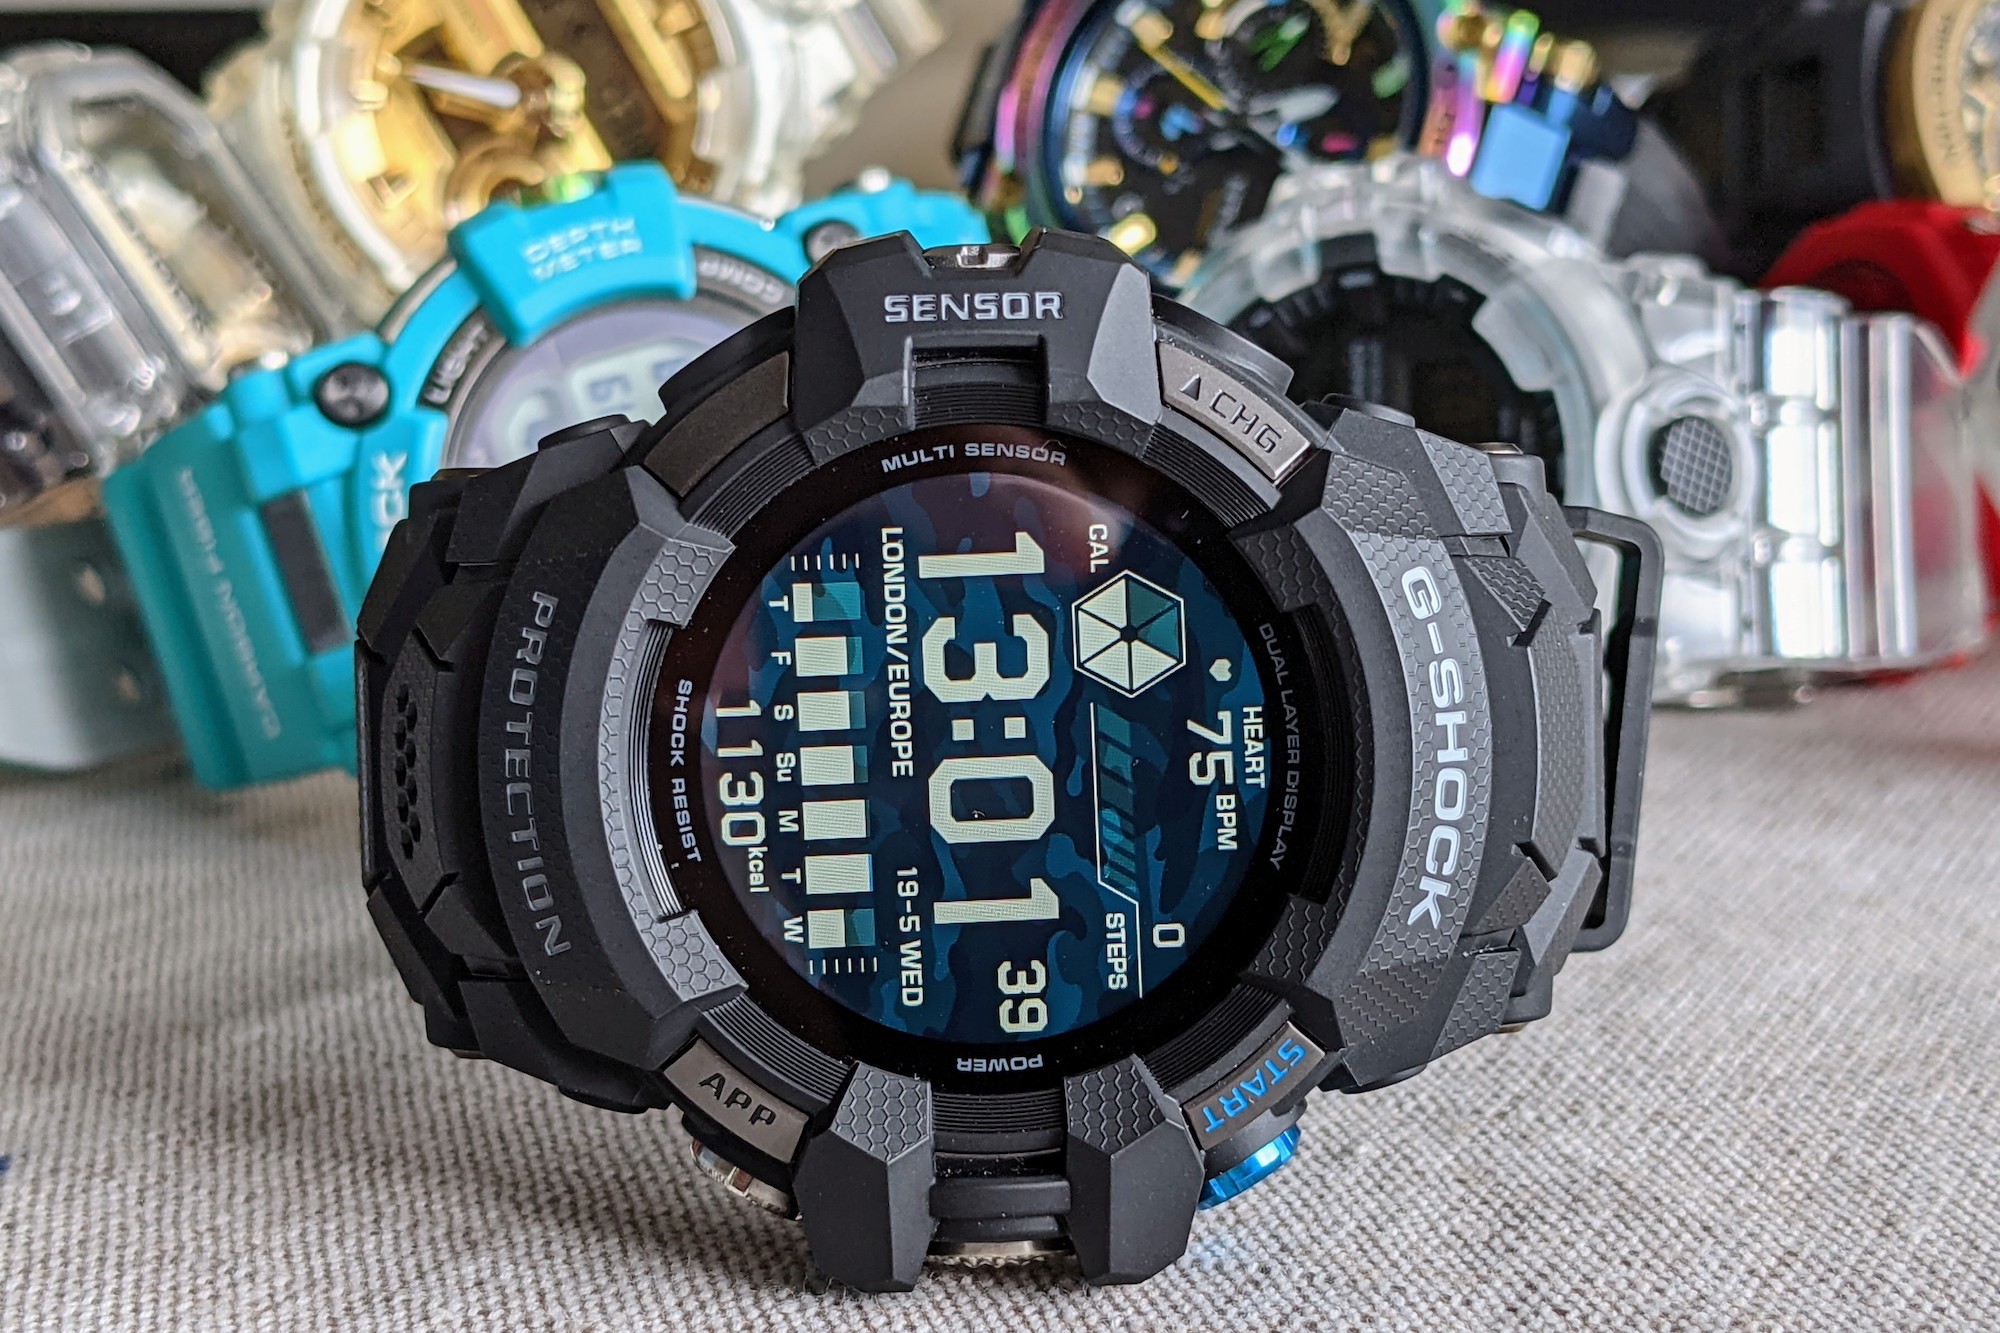 G-Shock GSW-H1000 Review: The G-Shock Collector's Choice | Digital Trends